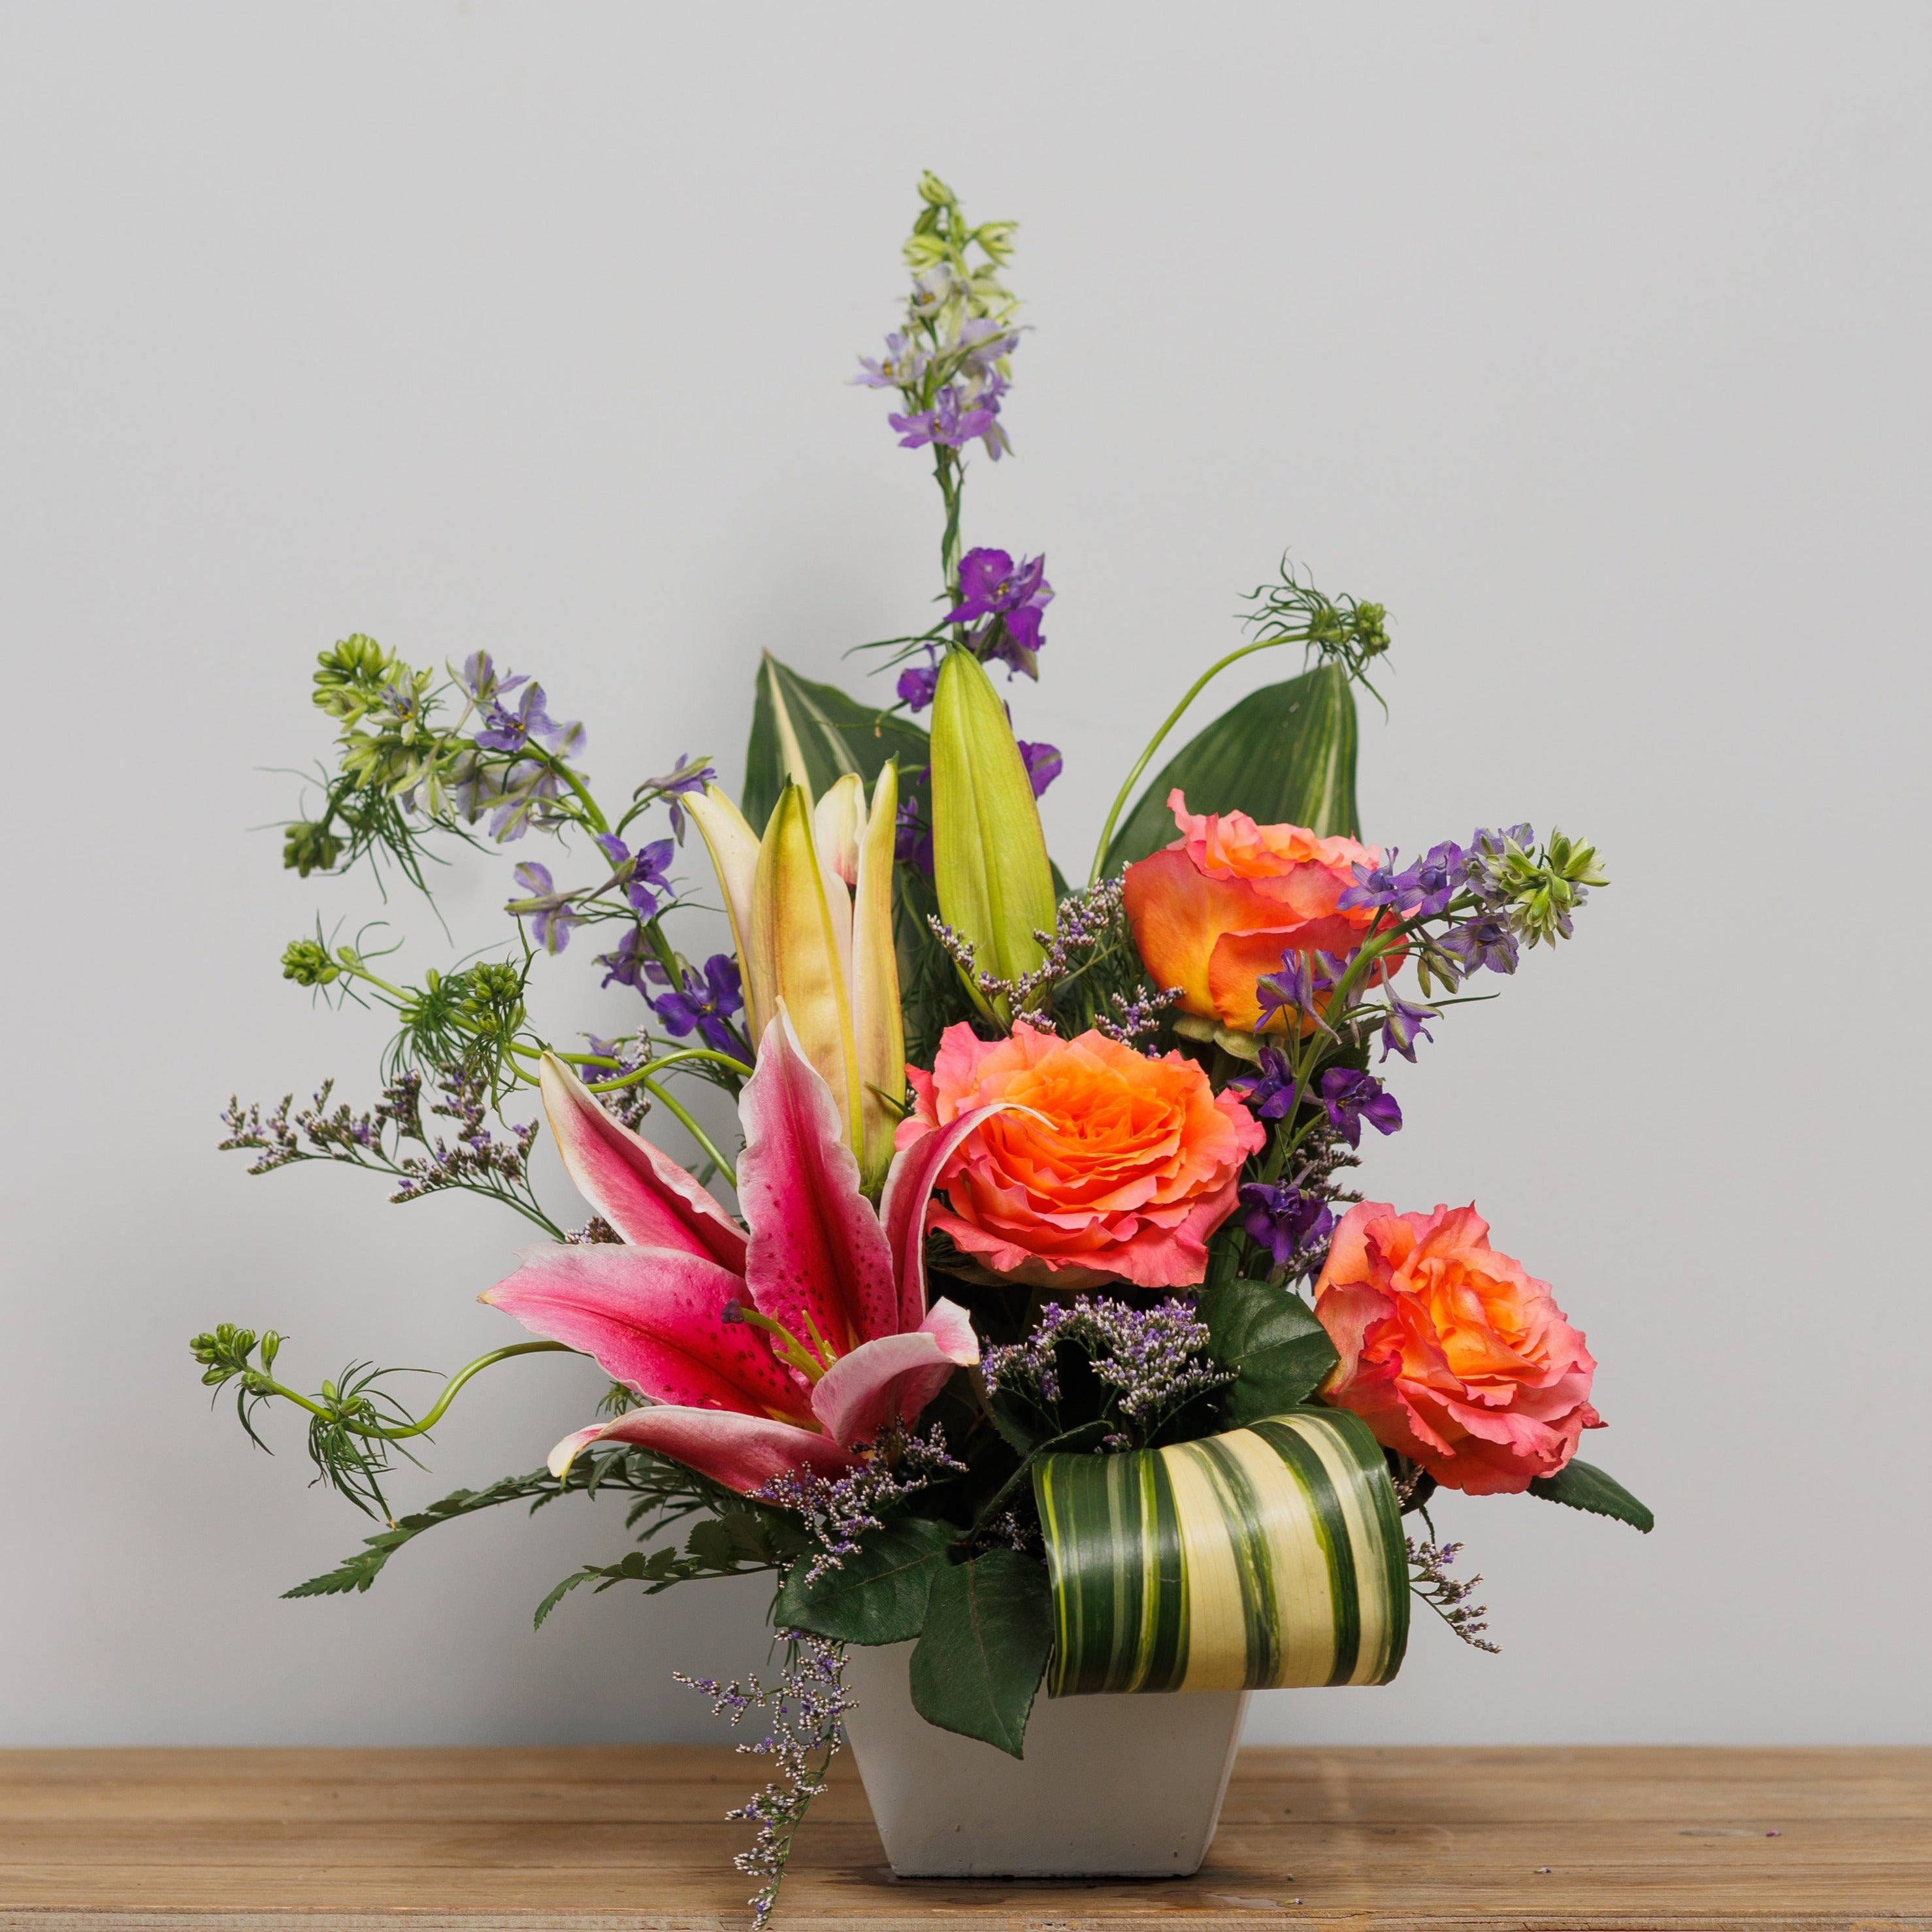 A tropical arrangement with orange roses and stargazer lilies.